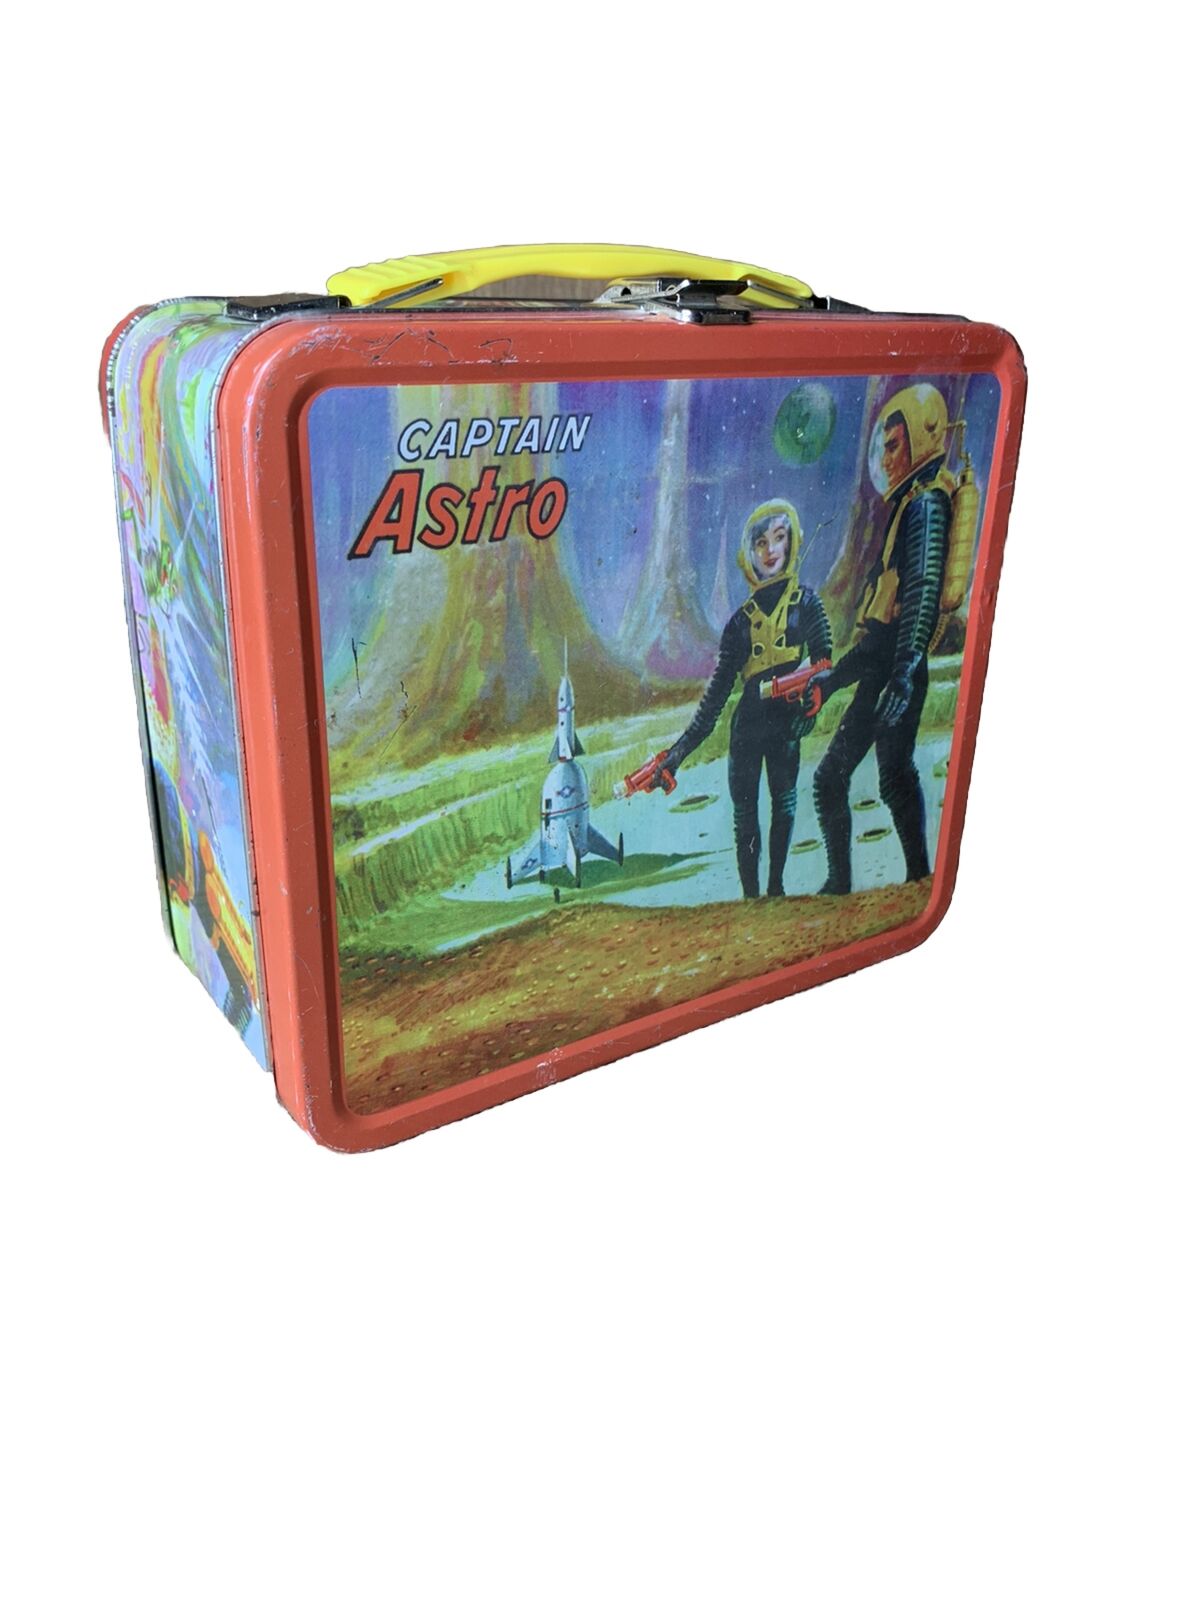 Captain Astro Vintage G Whiz Van Nuys CA Reproduction Lunch Box Space Rocket